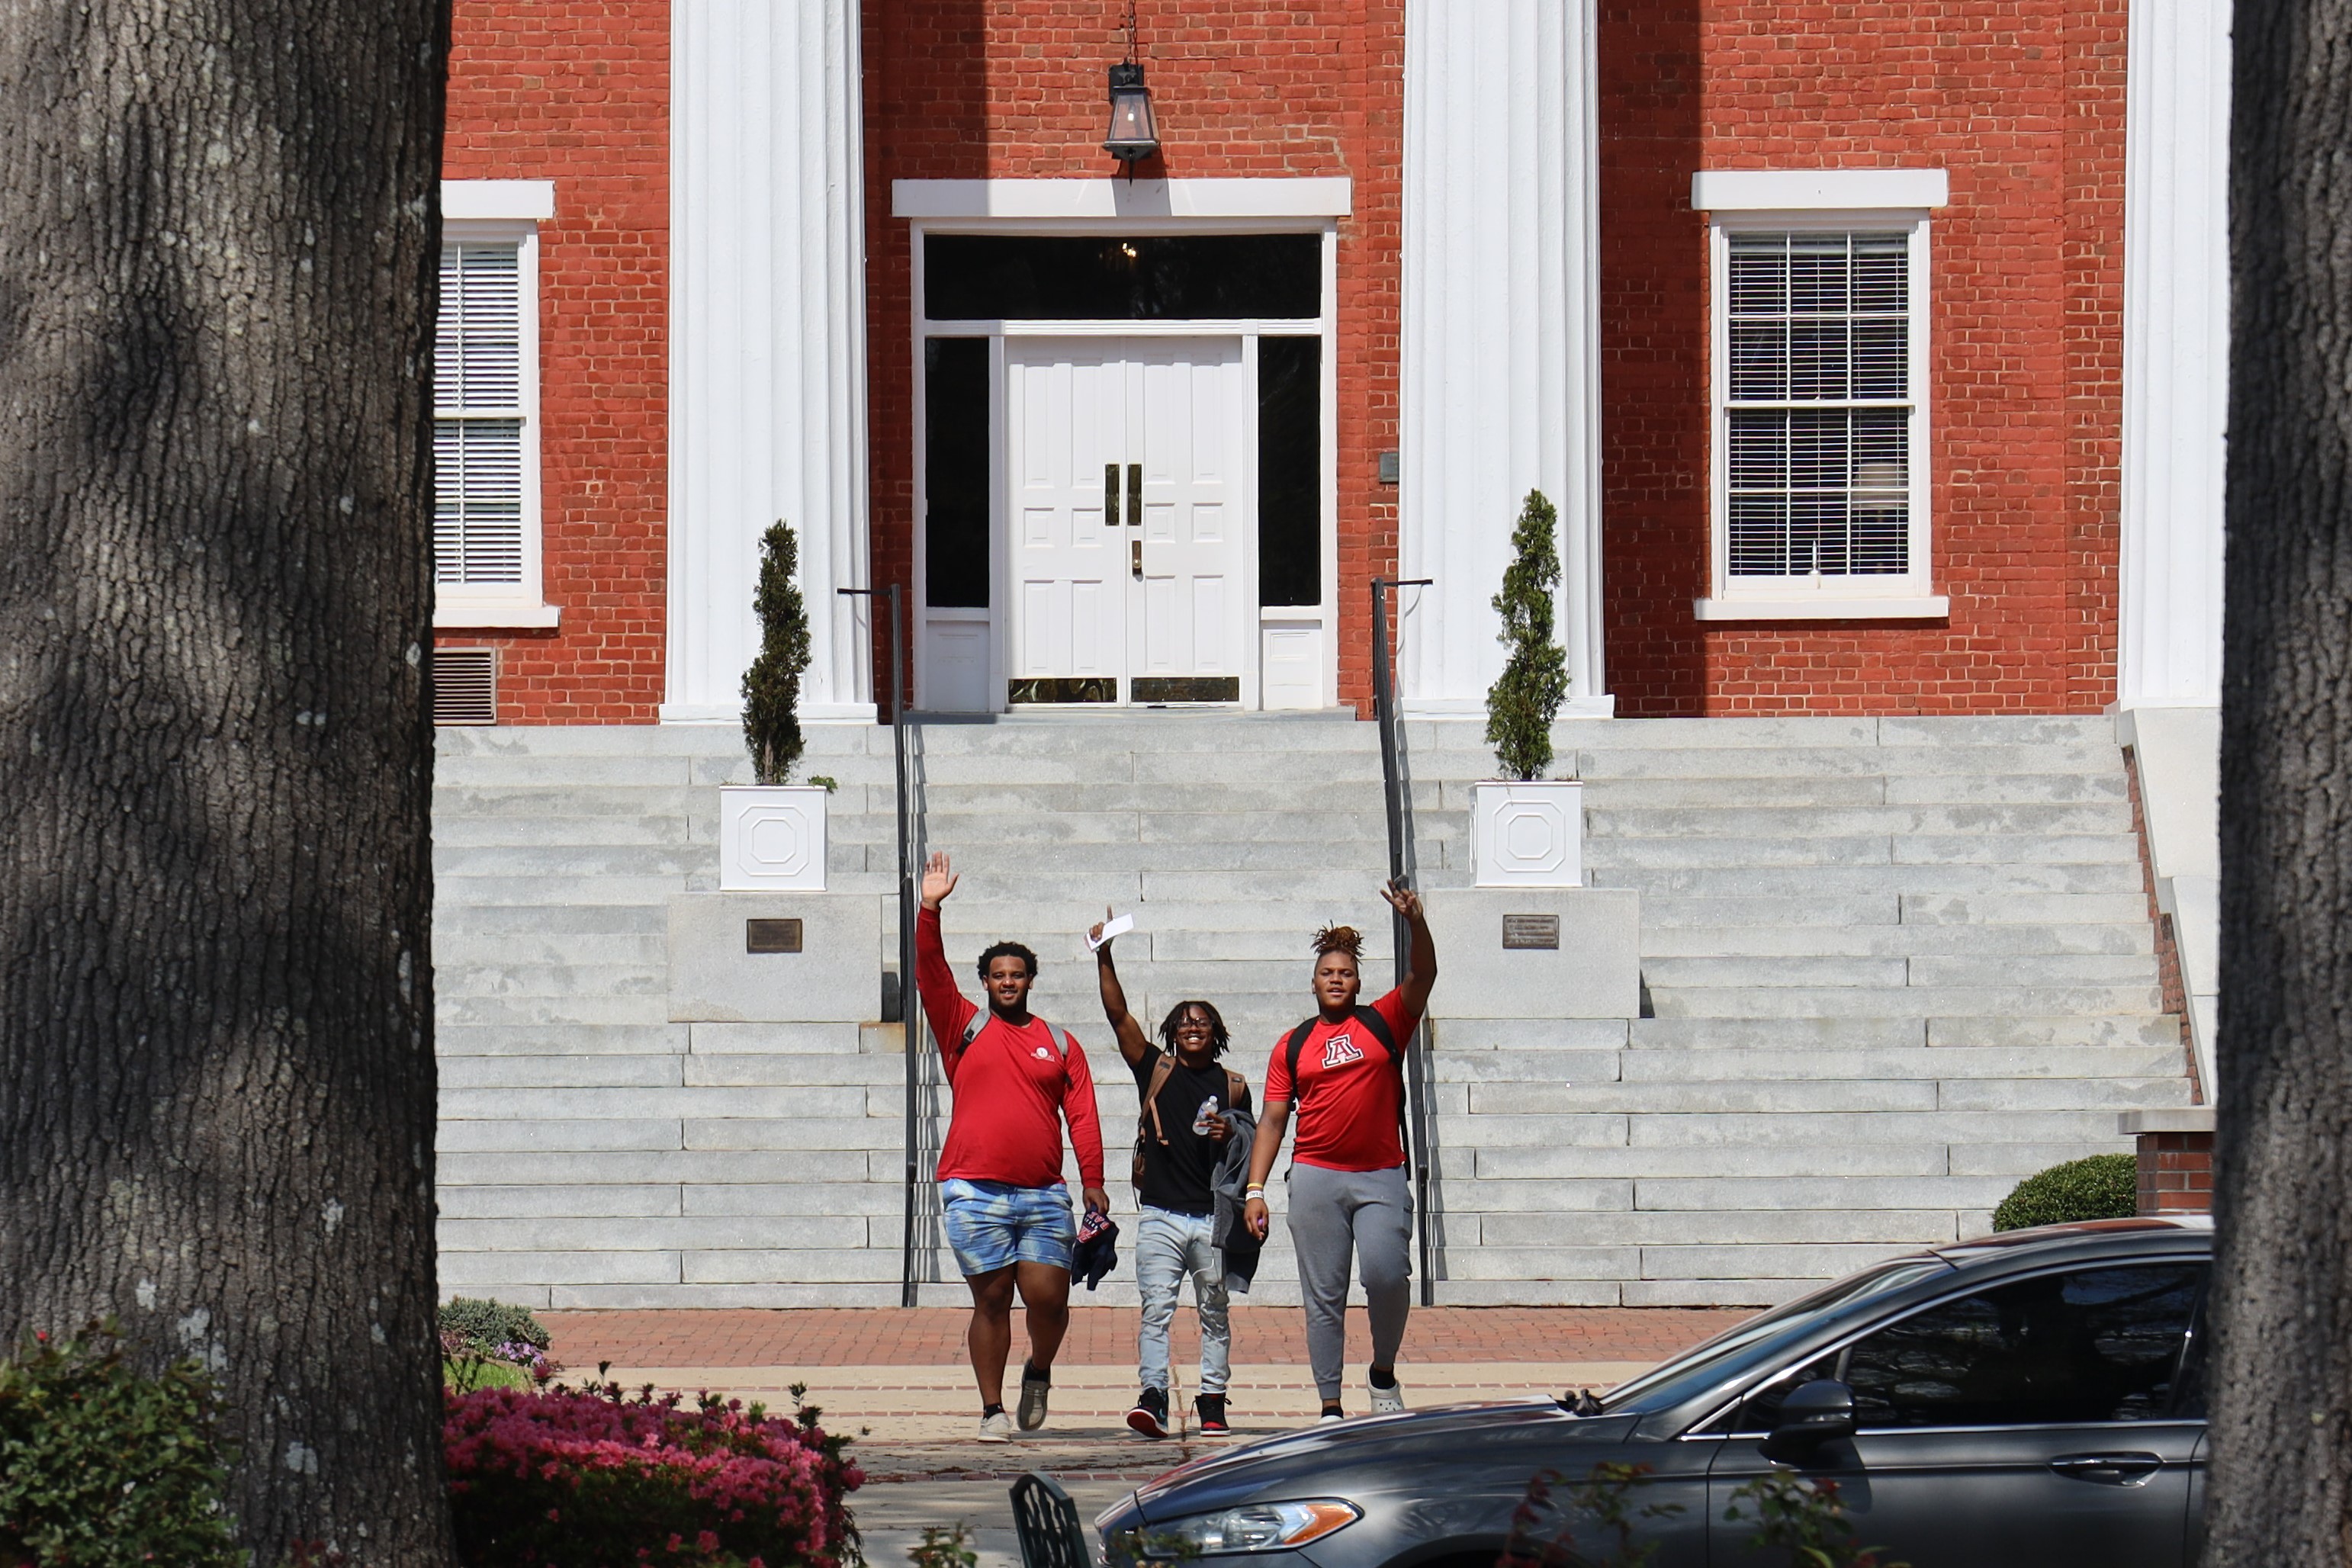 Three Louisburg College students waving to camera in front of Main Building.